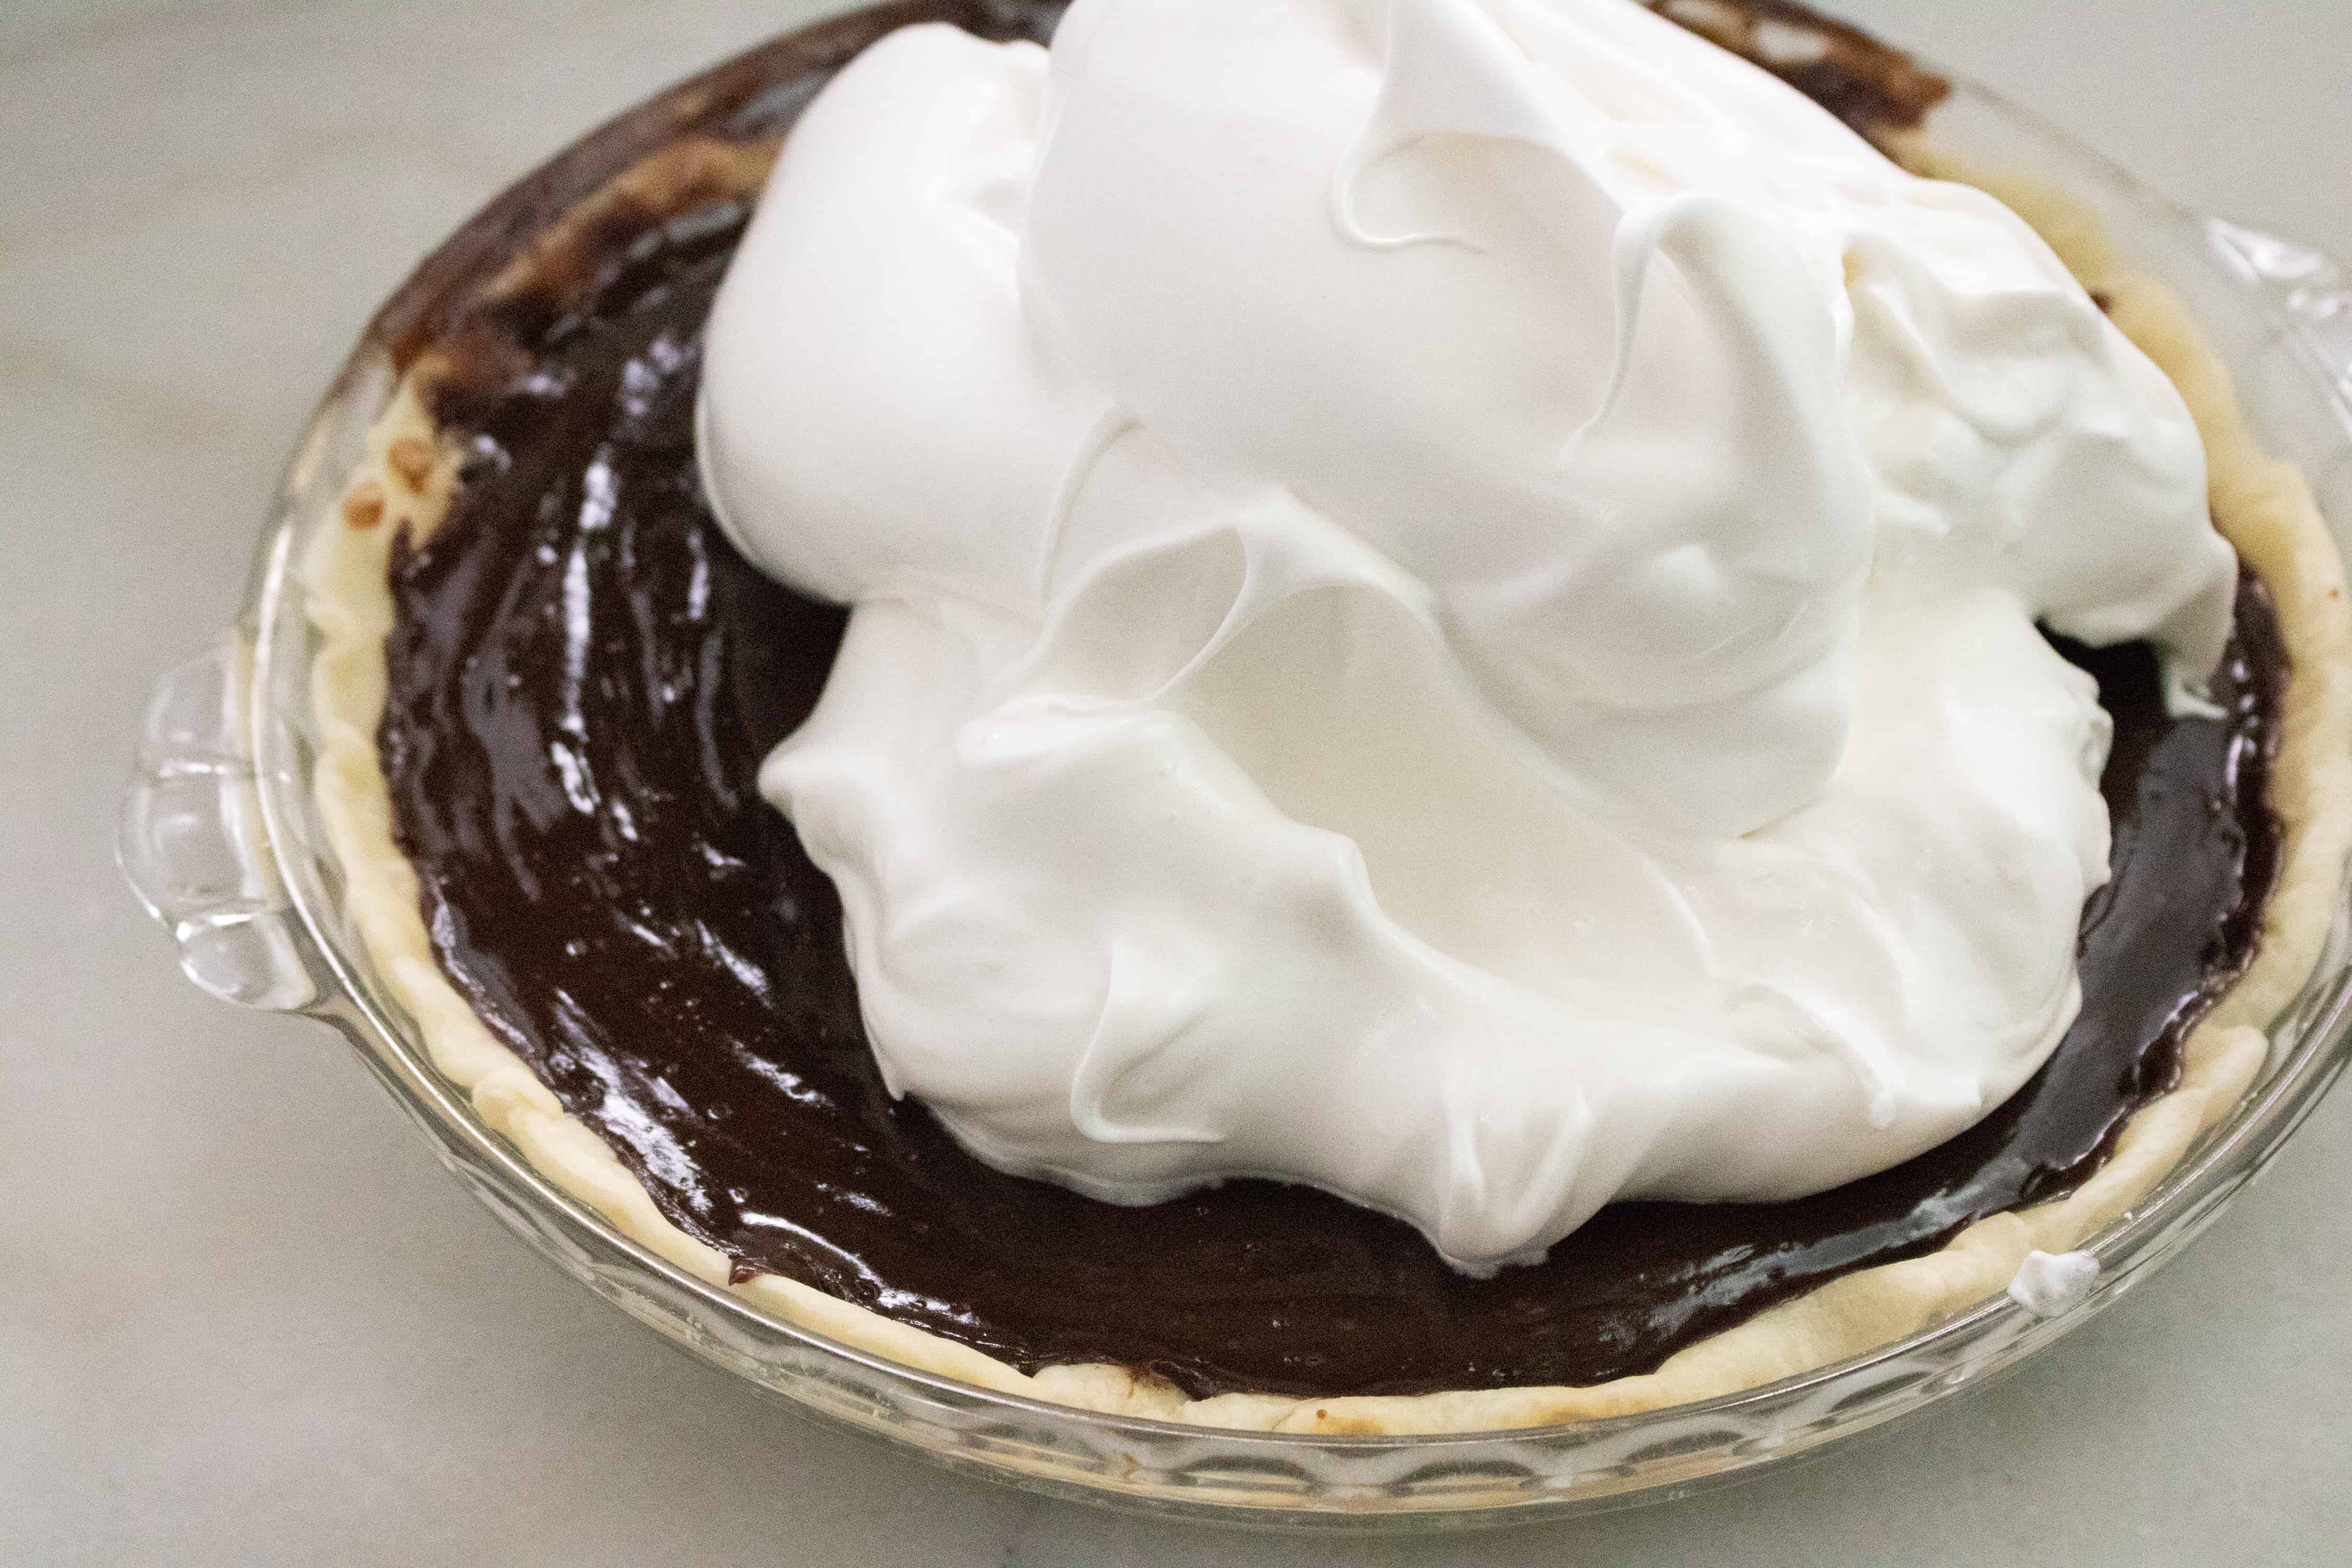 put the meringue topping on the pie